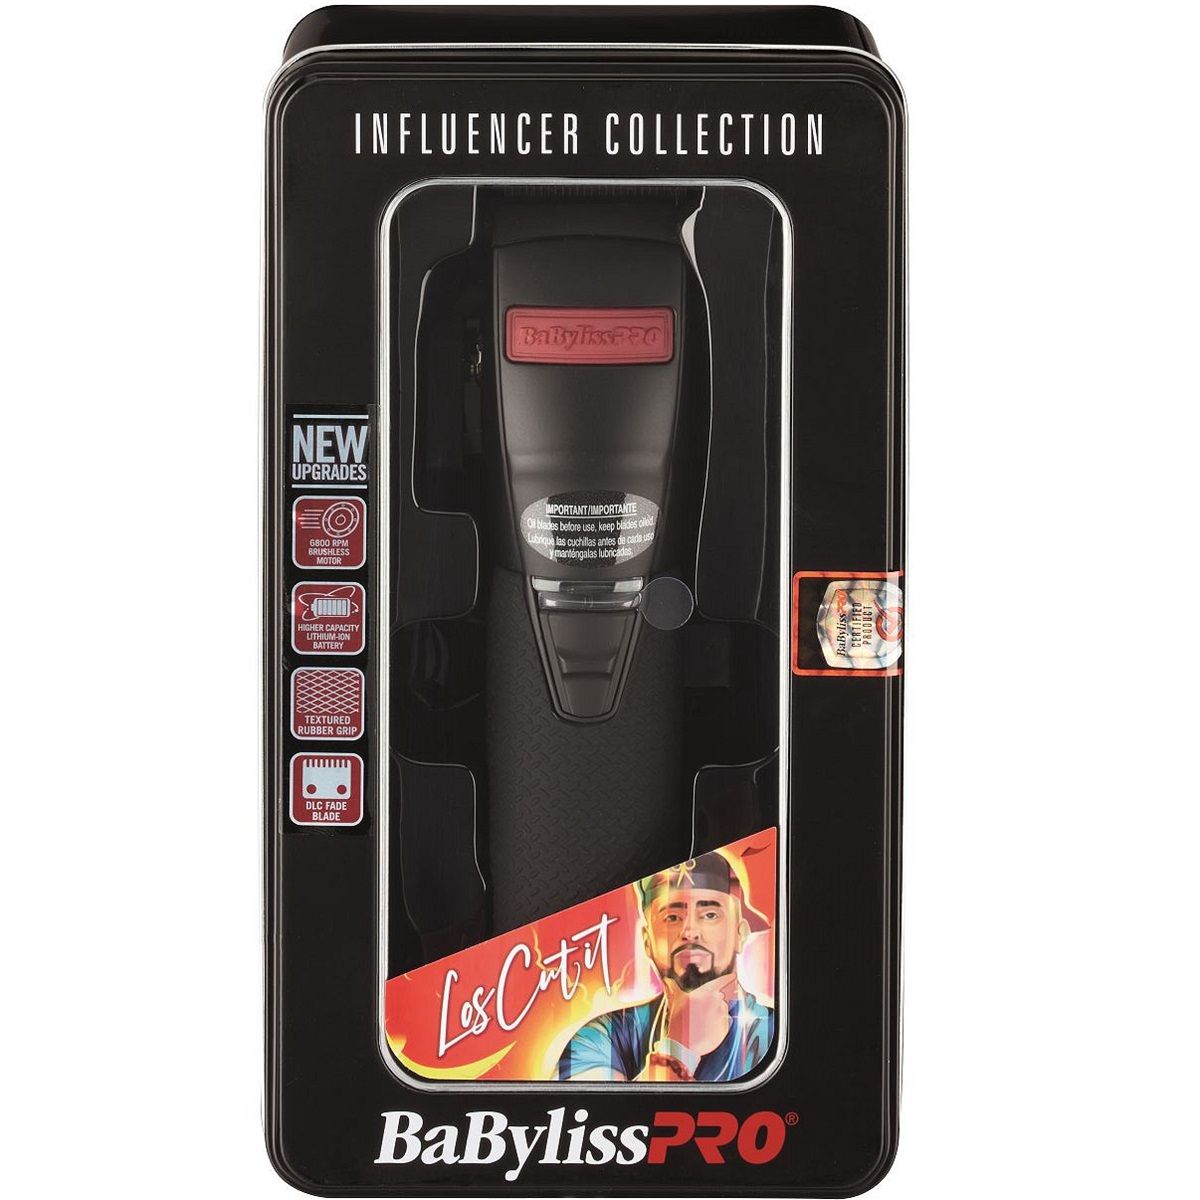 BaBylissPro 4 Barbers INFLUENCER COLLECTION BOOST+ Metal Lithium Clipper {Los Cut it} (#FX870RI)